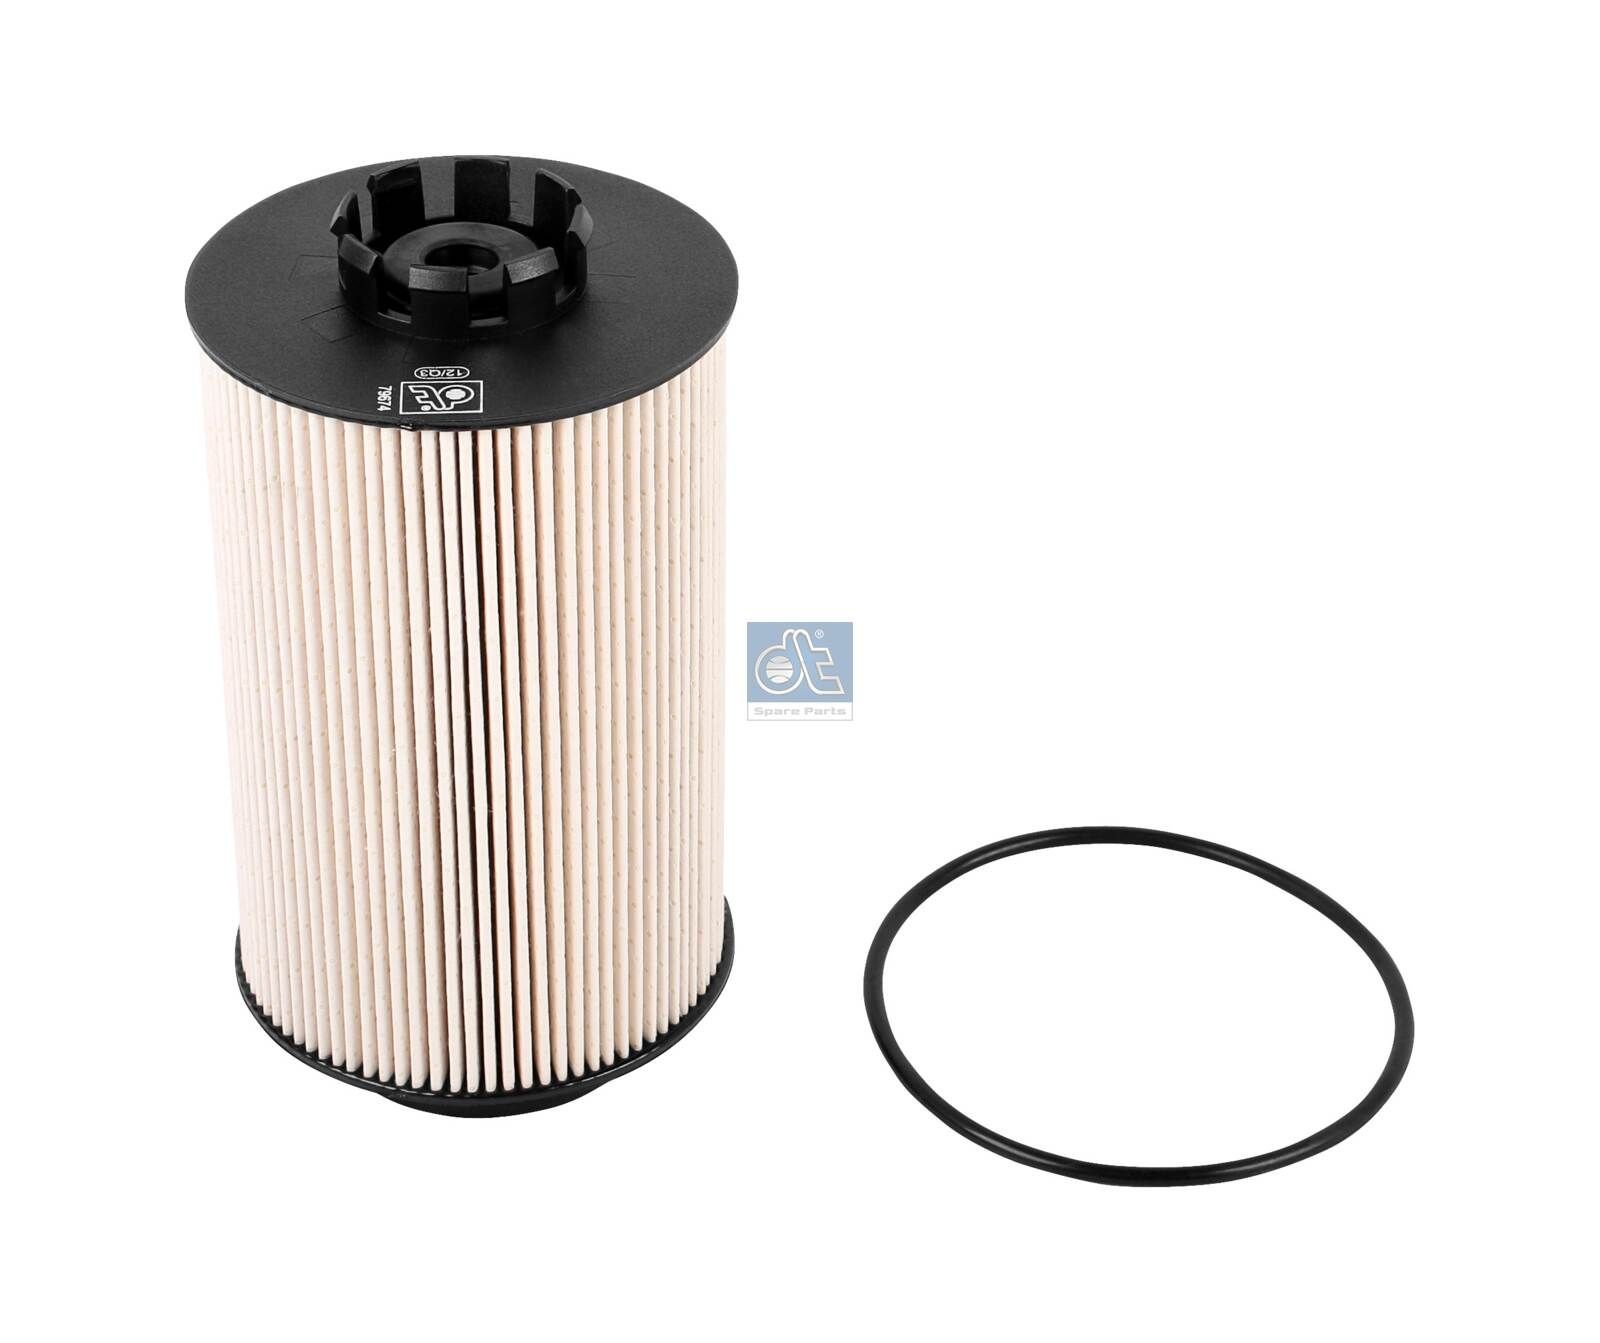 PU 1059 x DT Spare Parts 3.22009 Fuel filter 51 12503 0063